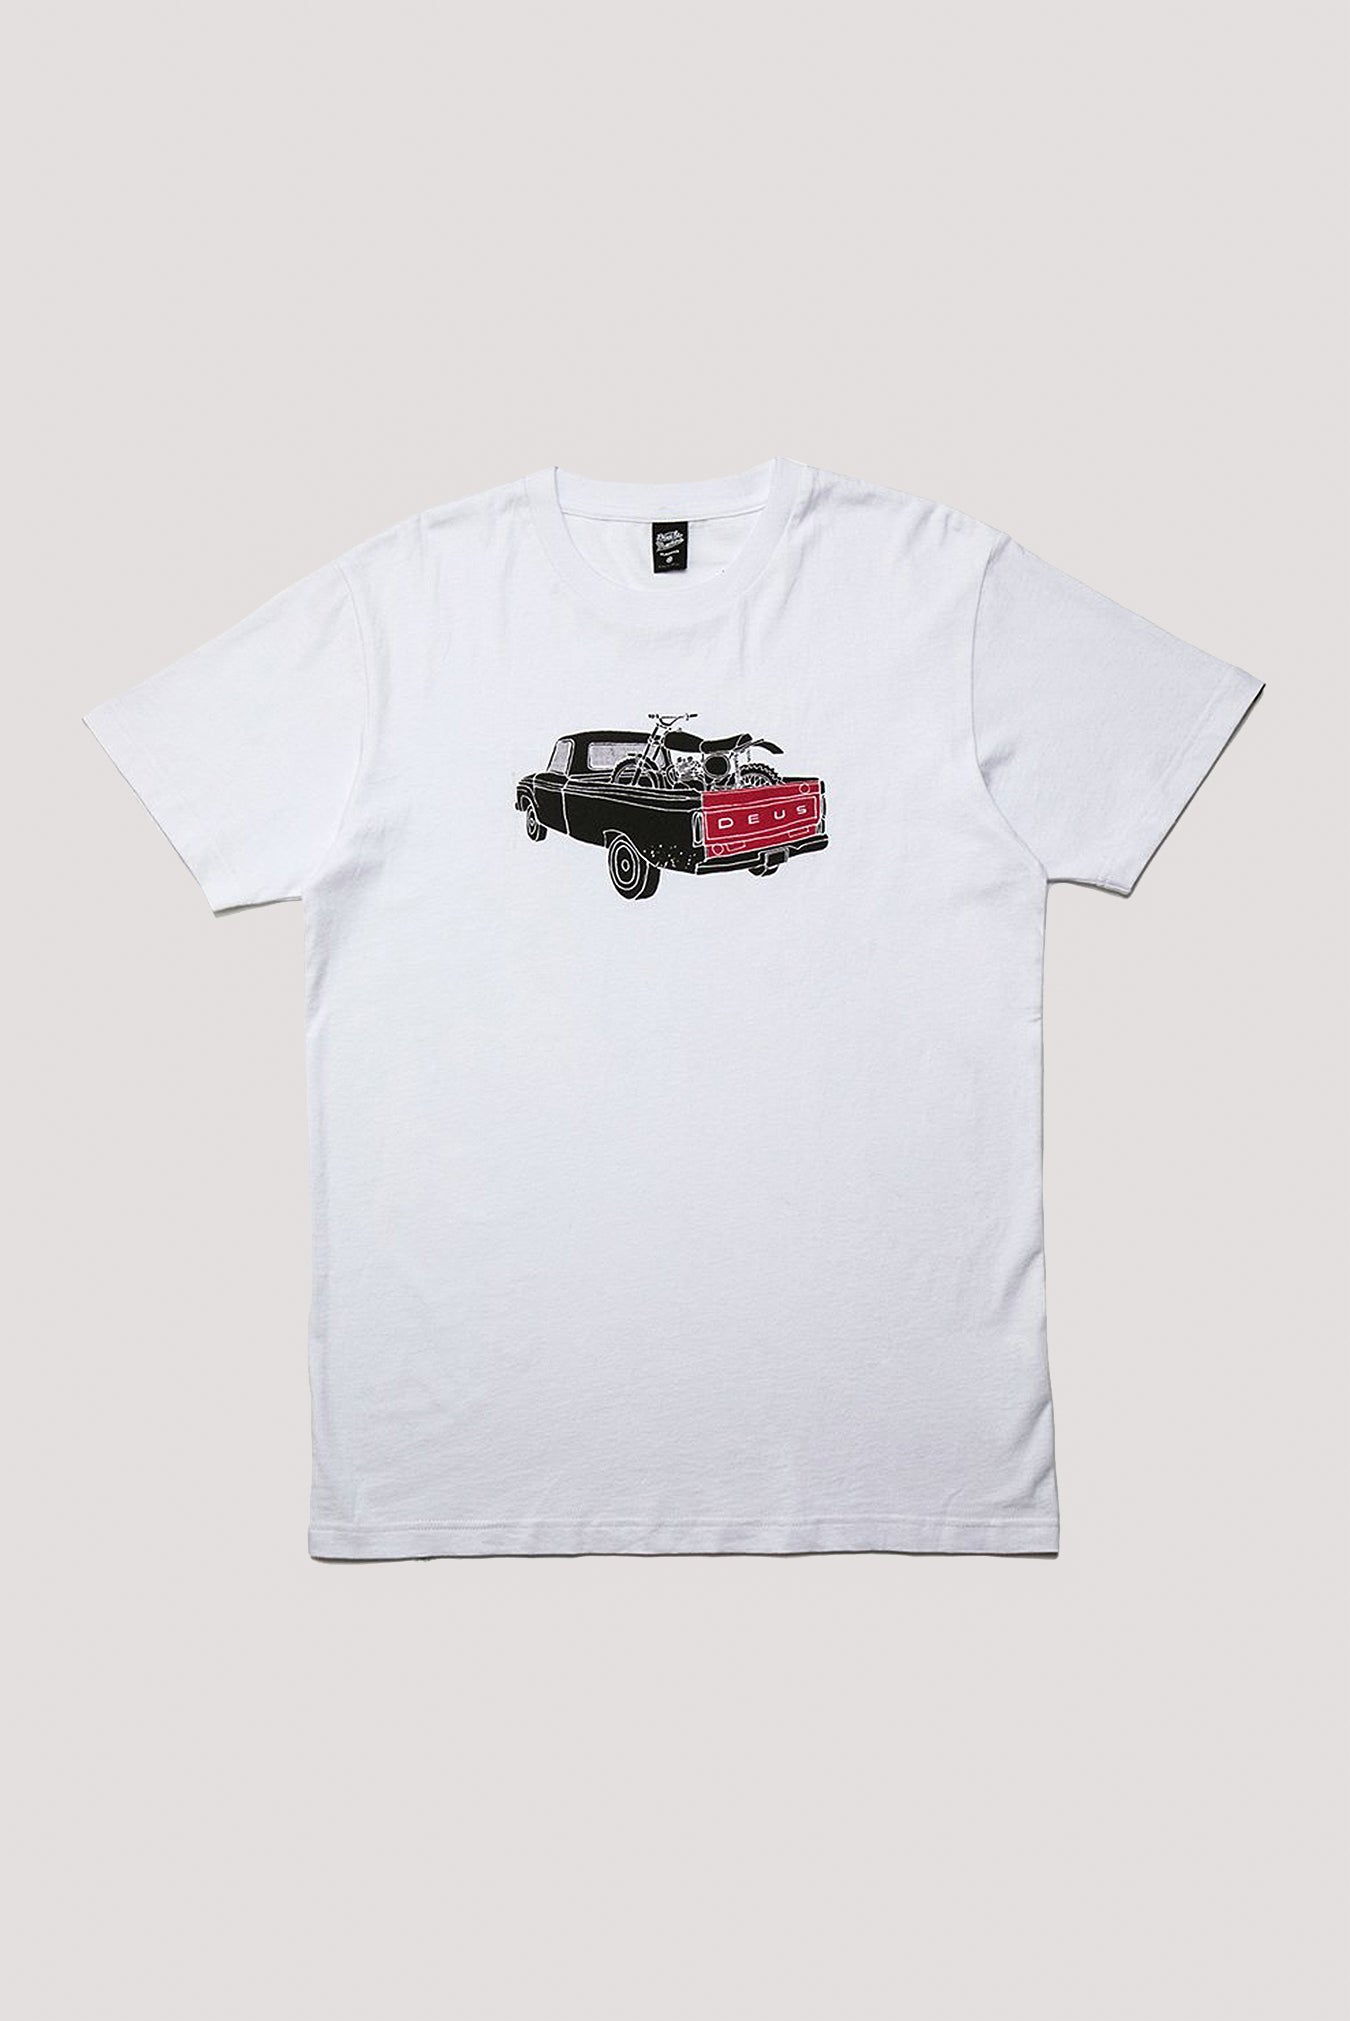 Carby Pickup Tee | North Beach